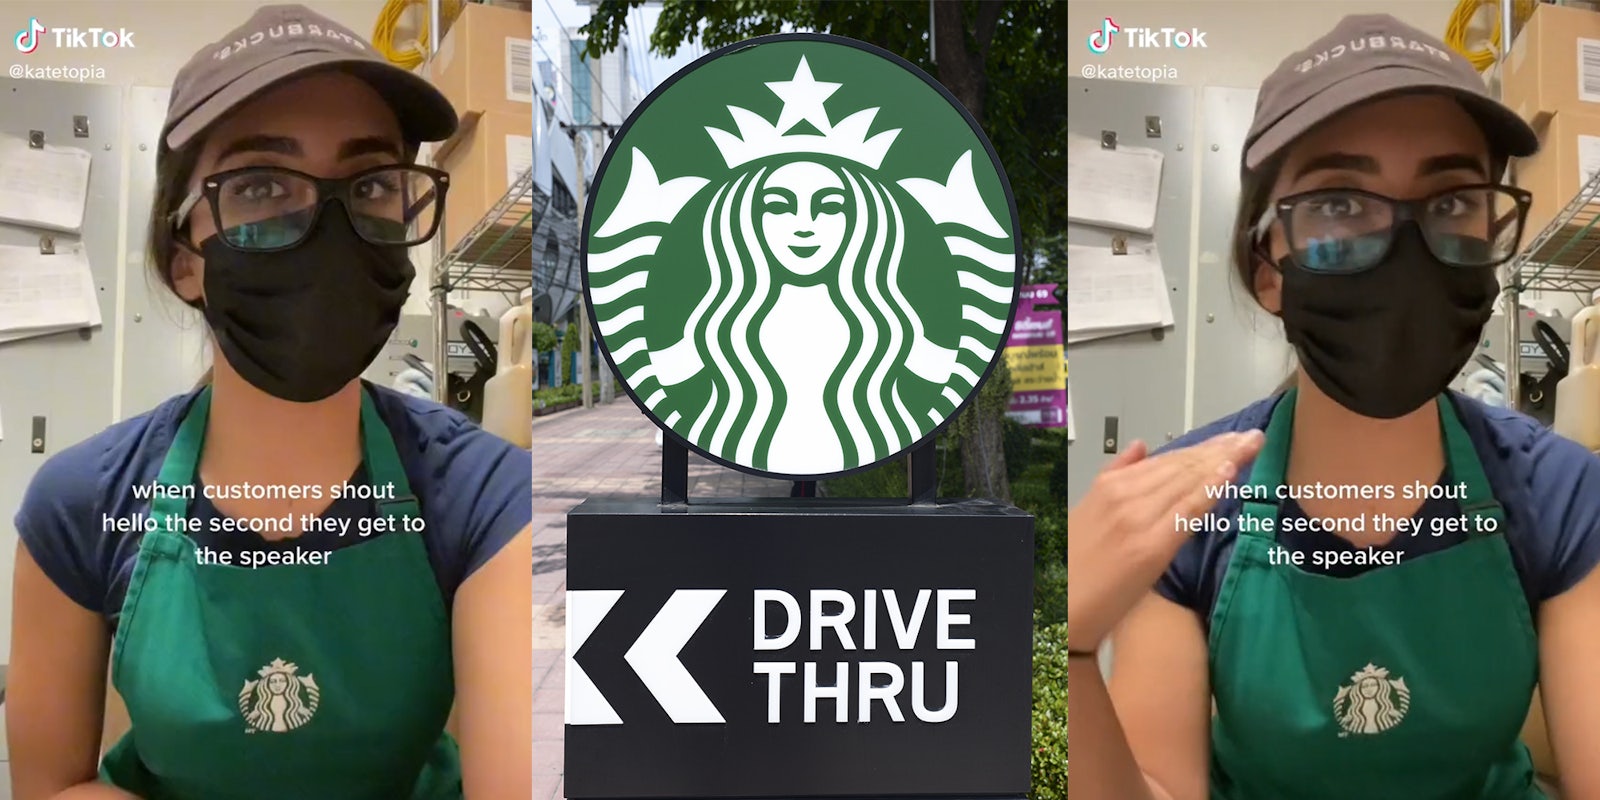 starbucks worker with caption 'when customers shout hello the second they get to the speaker' (l&r) starbucks drive thru sign (c)